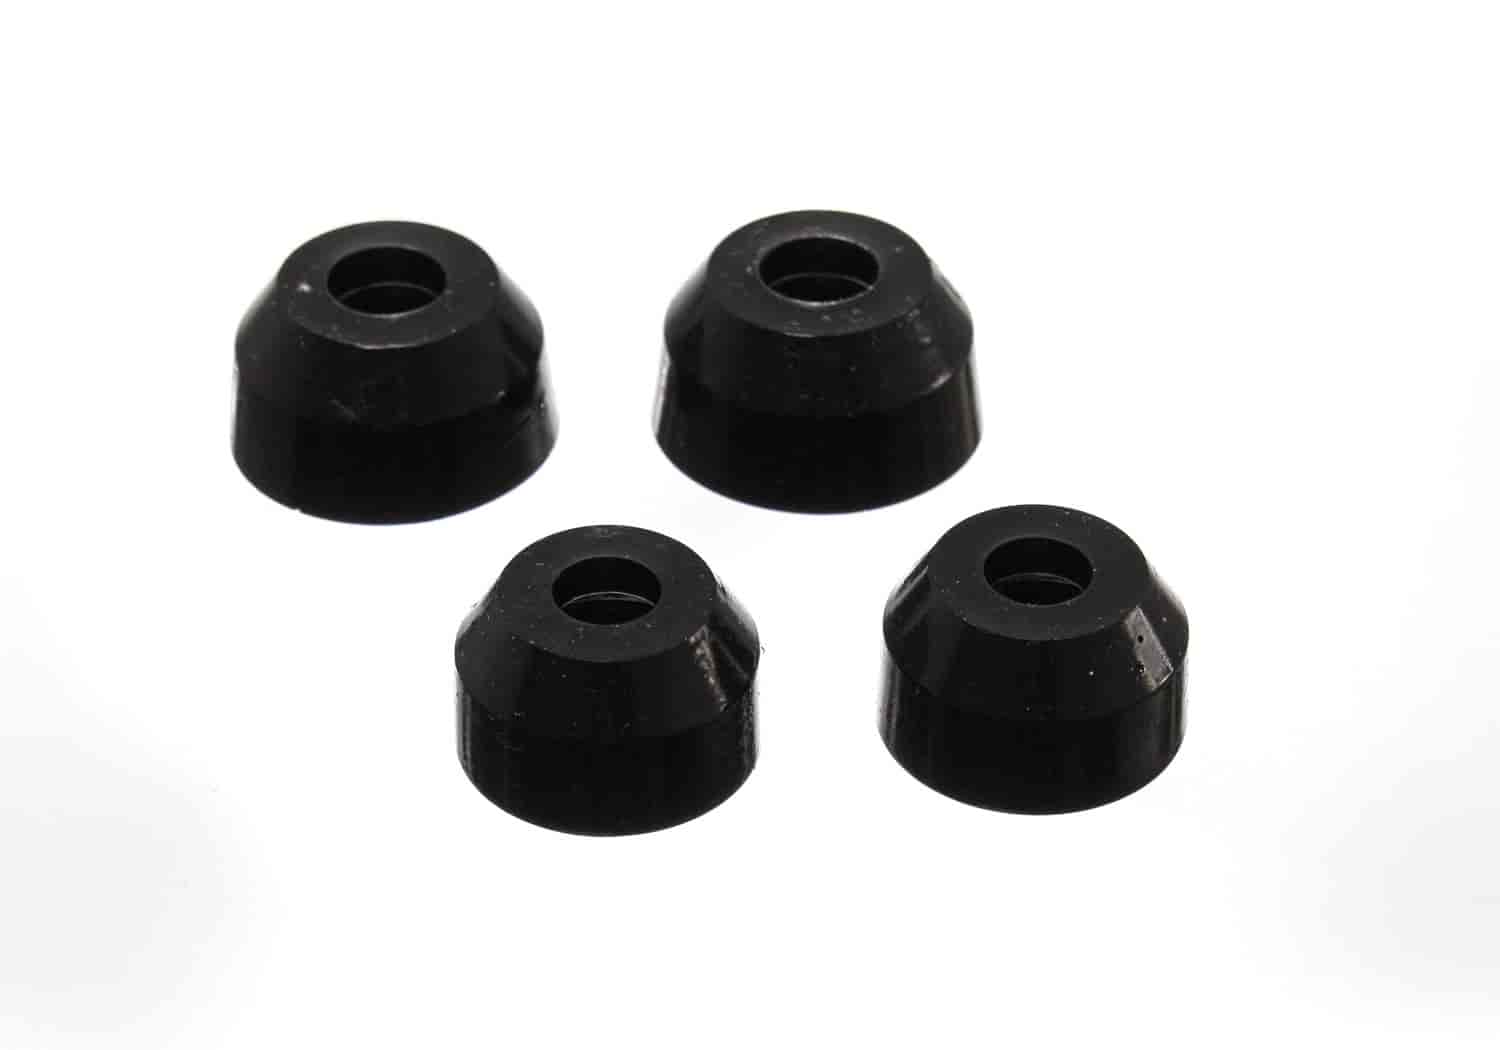 Front Ball Joint Boots 1970-81 Chevy Camaro, Pontaic Firebird, & 1963-96 Full Size GM Car